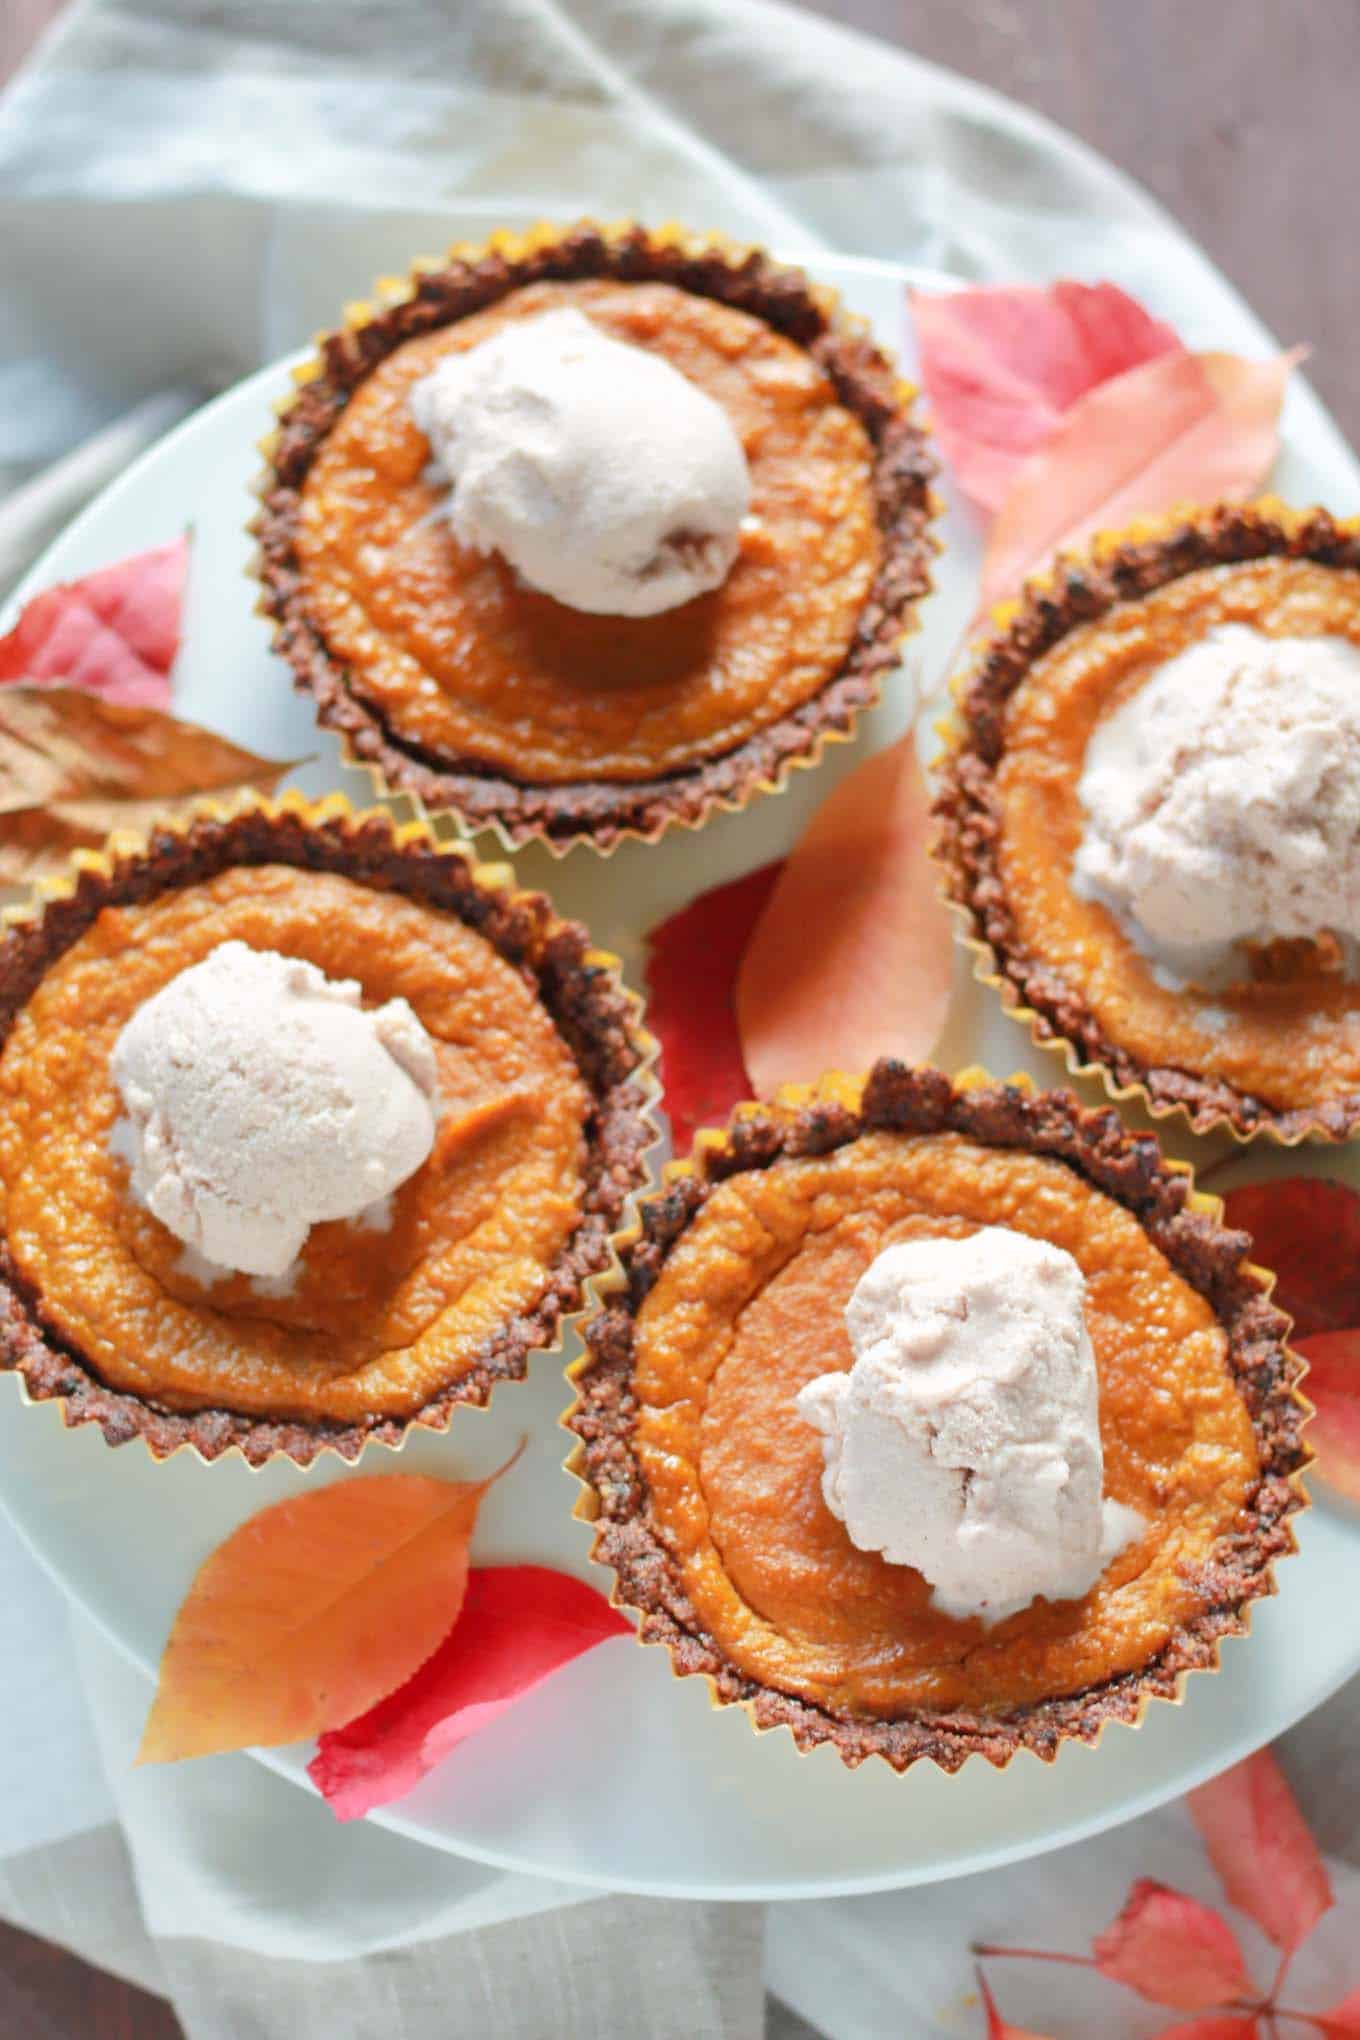 Four mini pies on a cake stand with fall leaves surrounding them